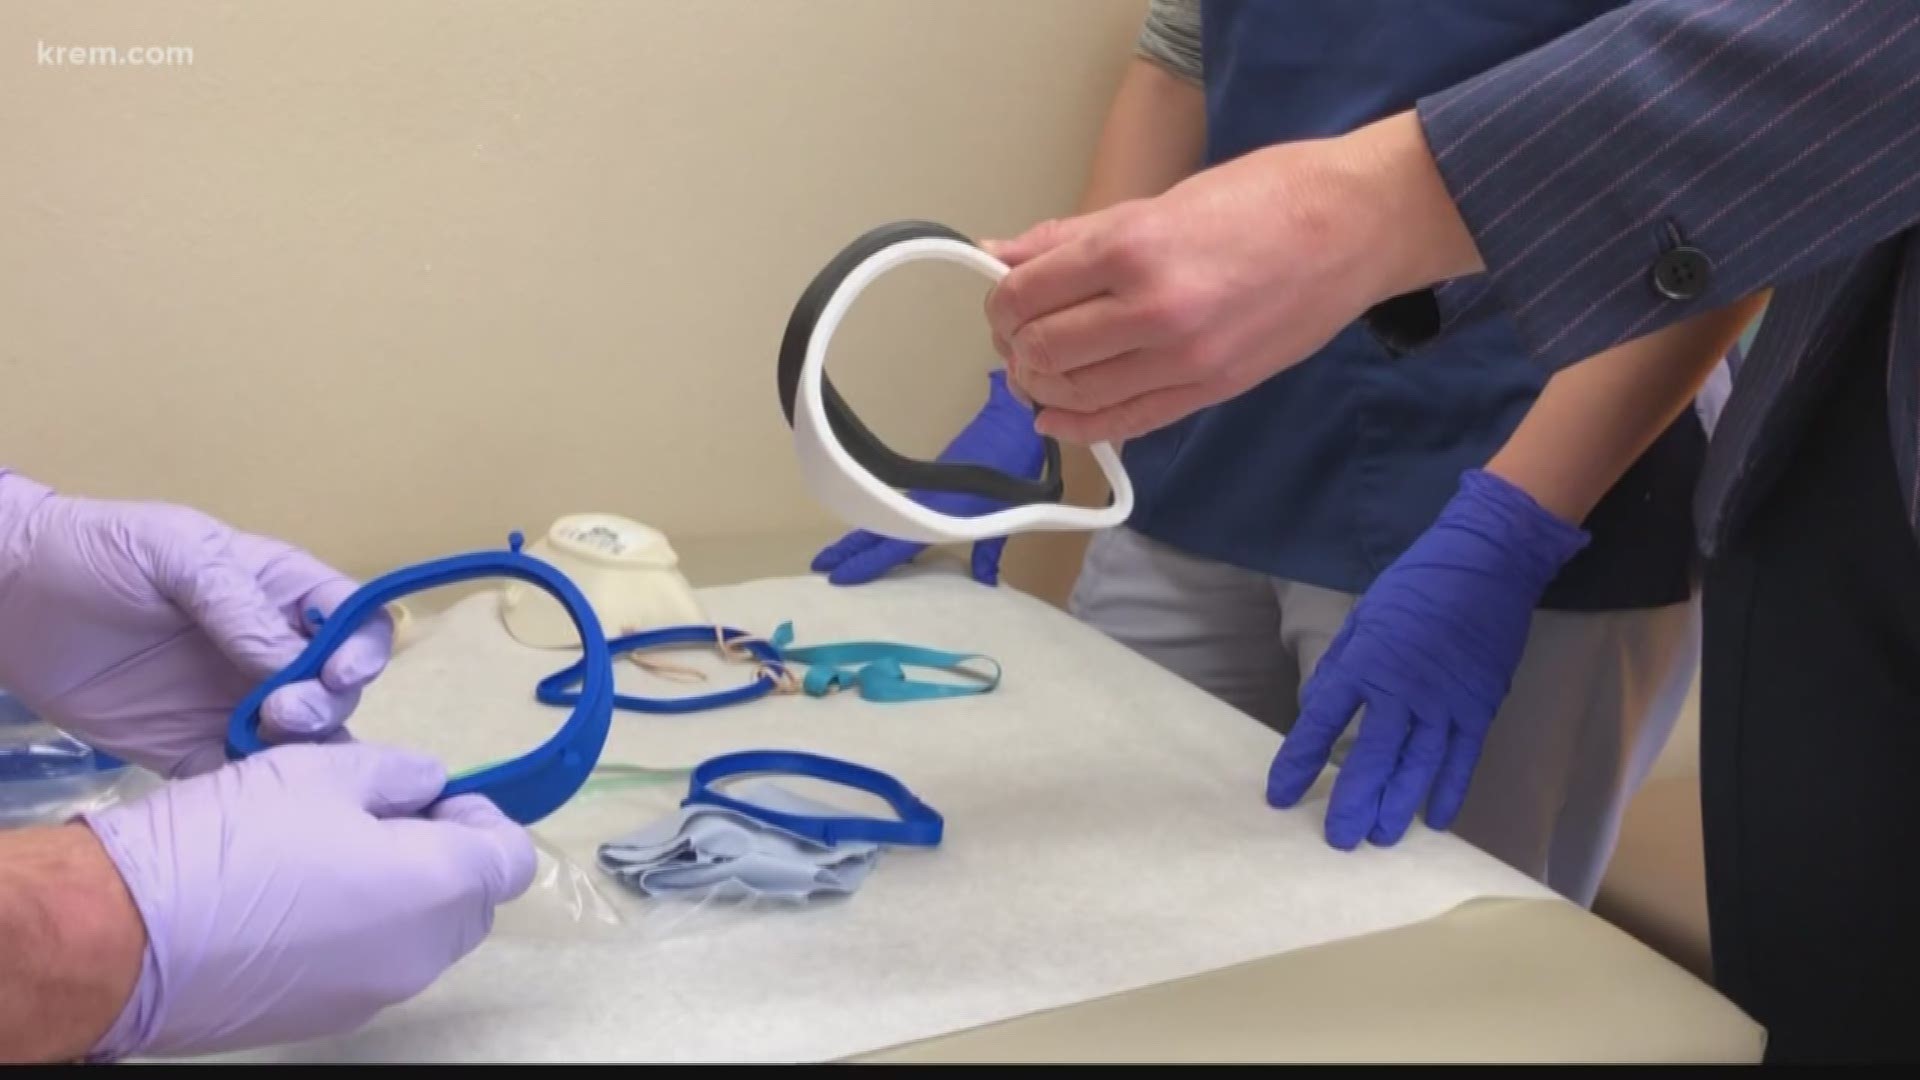 A University of Idaho professor recently saw news of shortages of protective equipment for healthcare workers across the country and decided to help.